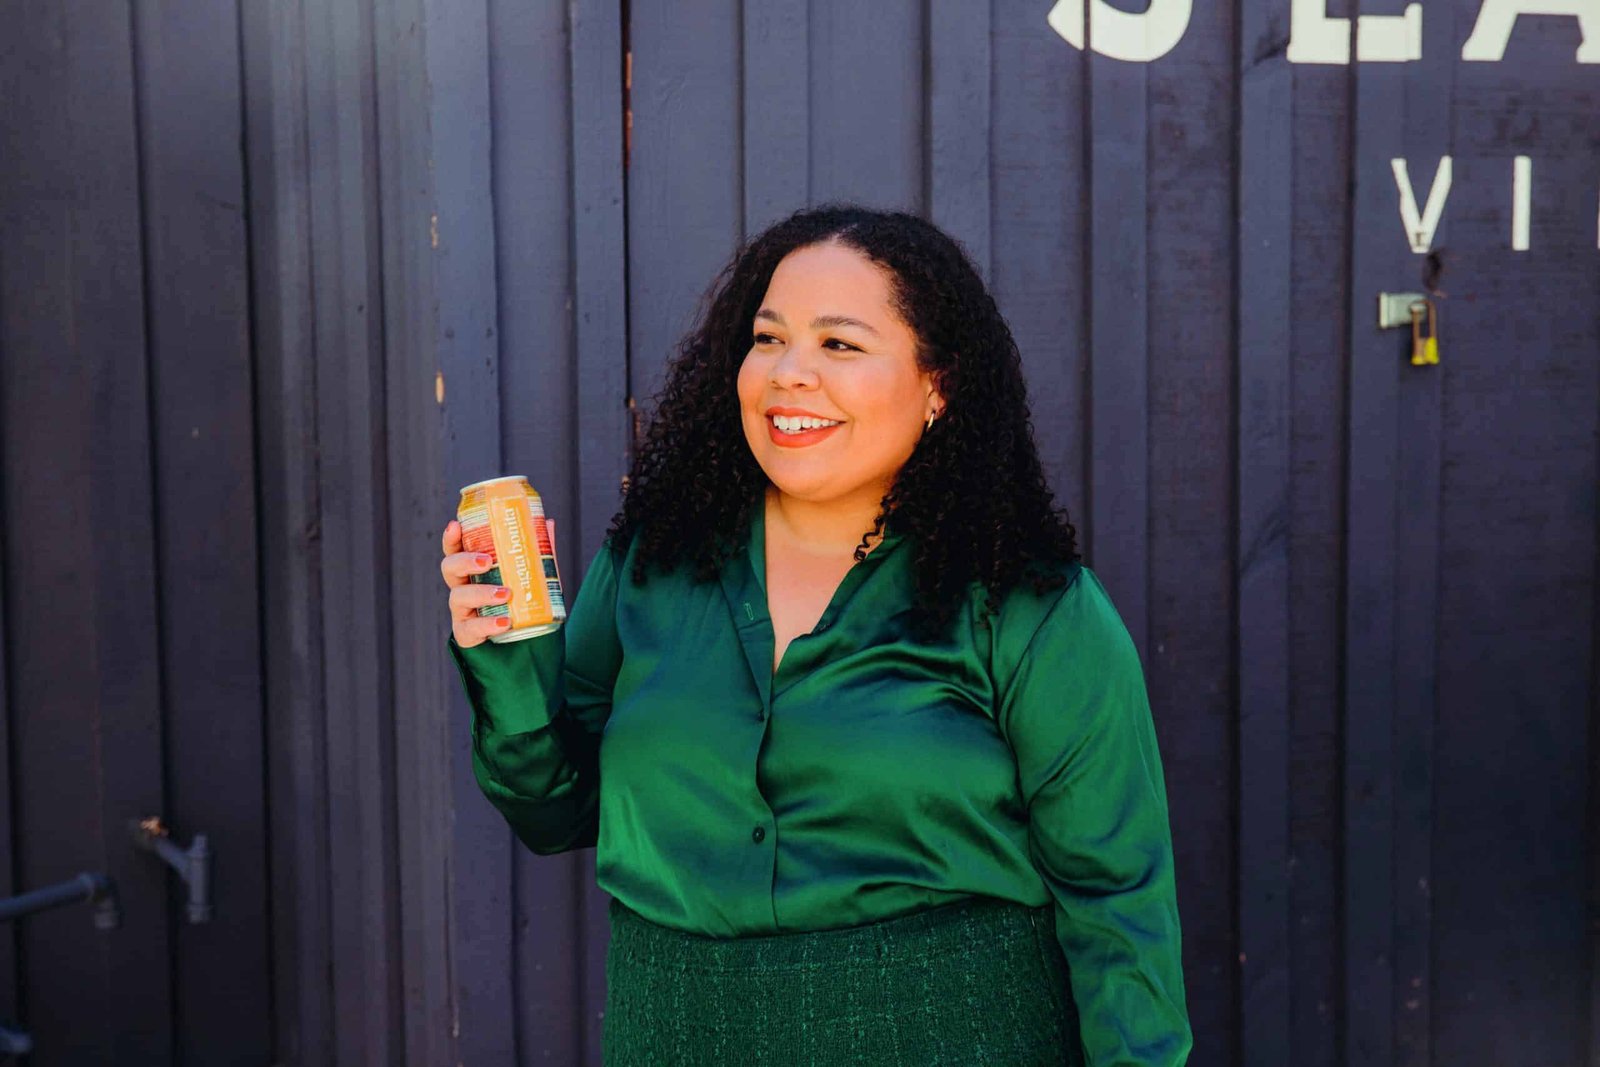 A Latin woman in a green shirt and green skirt holding a beer.